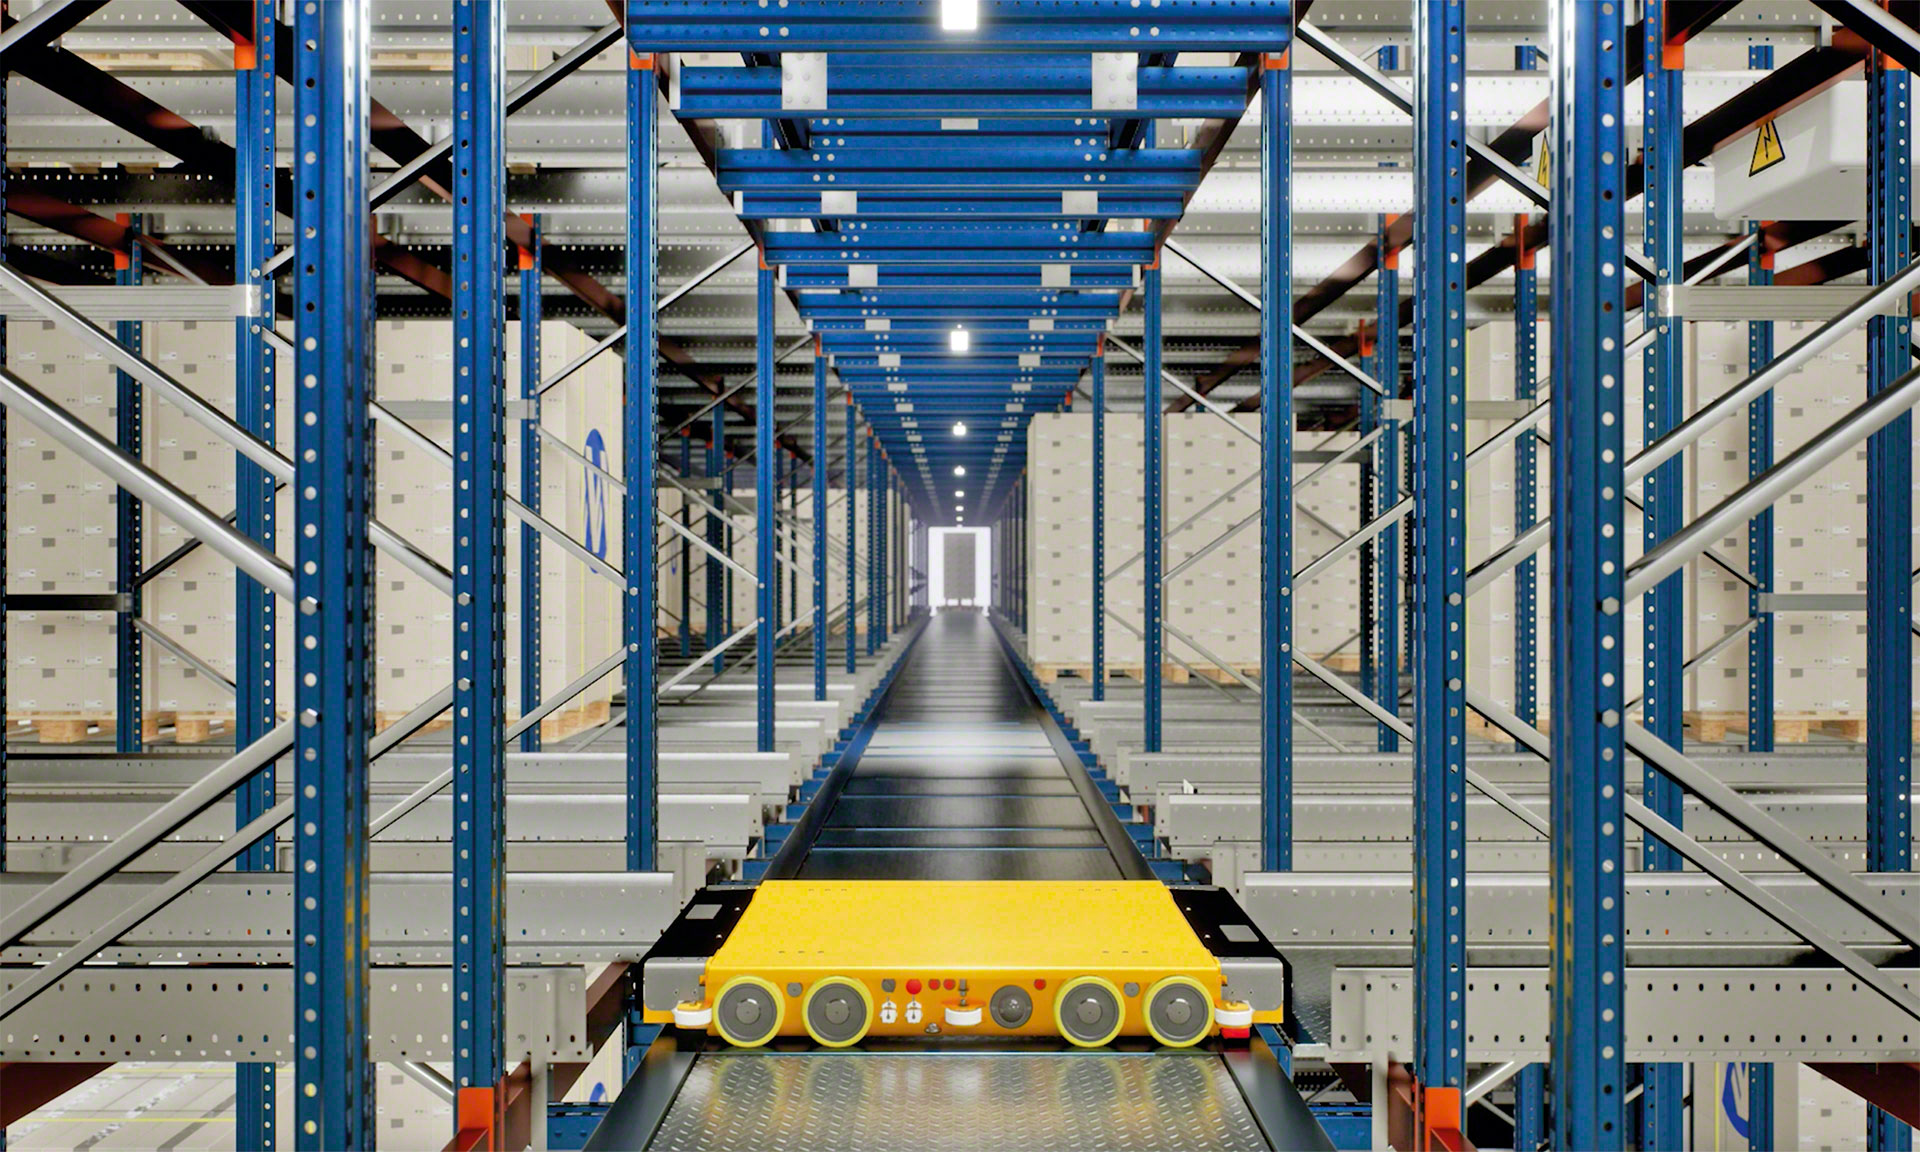 The 3D shuttle can navigate the racking system’s aisles autonomously